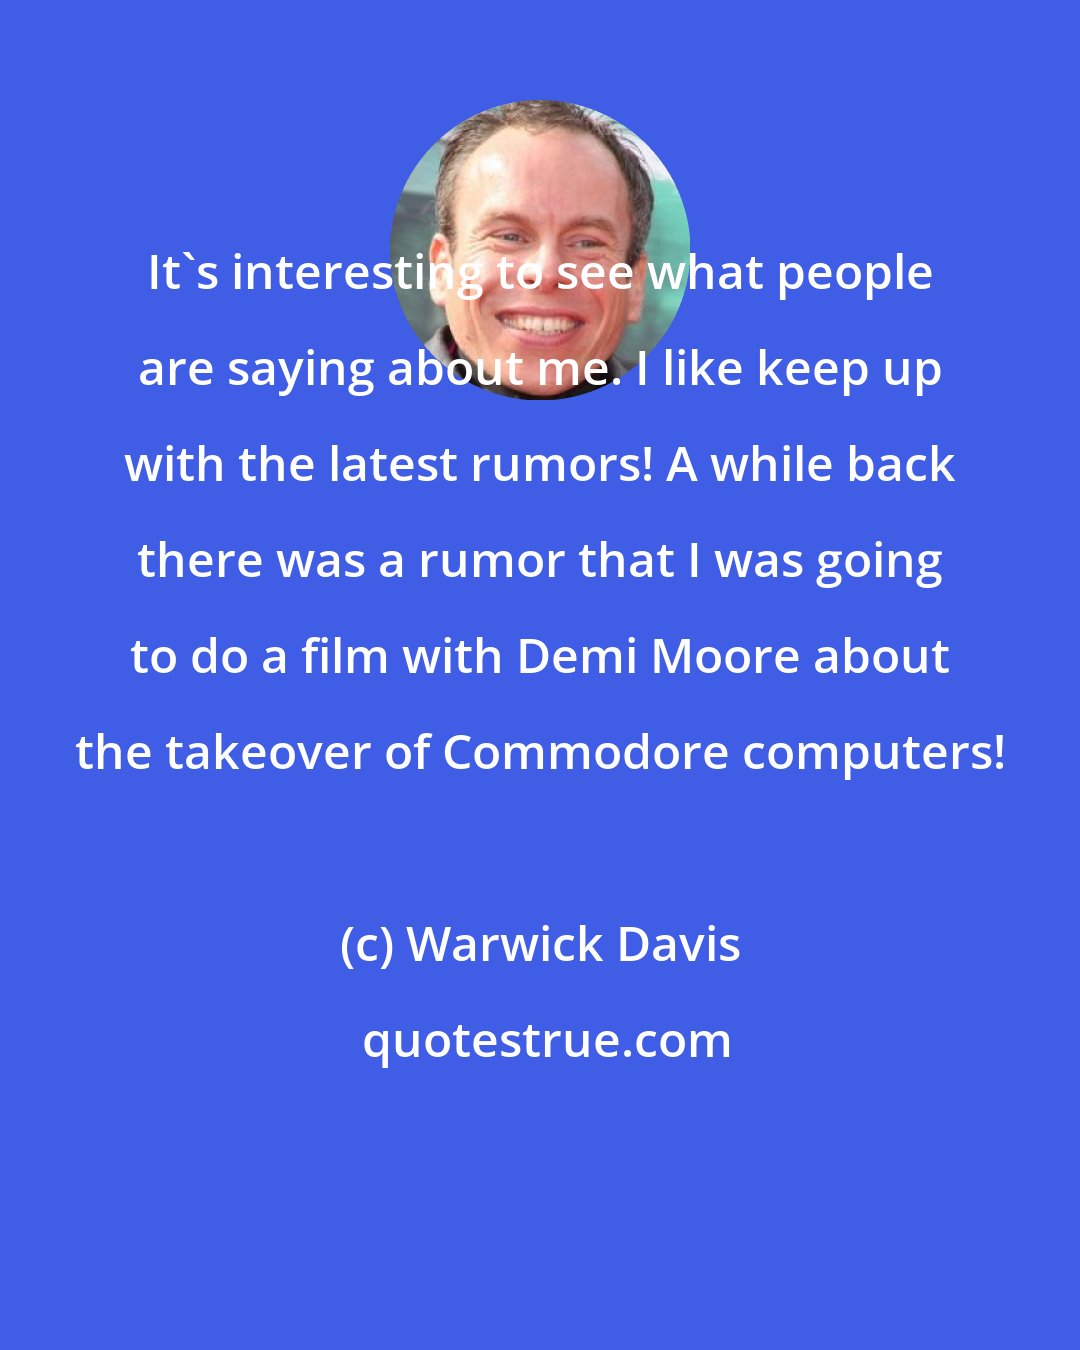 Warwick Davis: It's interesting to see what people are saying about me. I like keep up with the latest rumors! A while back there was a rumor that I was going to do a film with Demi Moore about the takeover of Commodore computers!